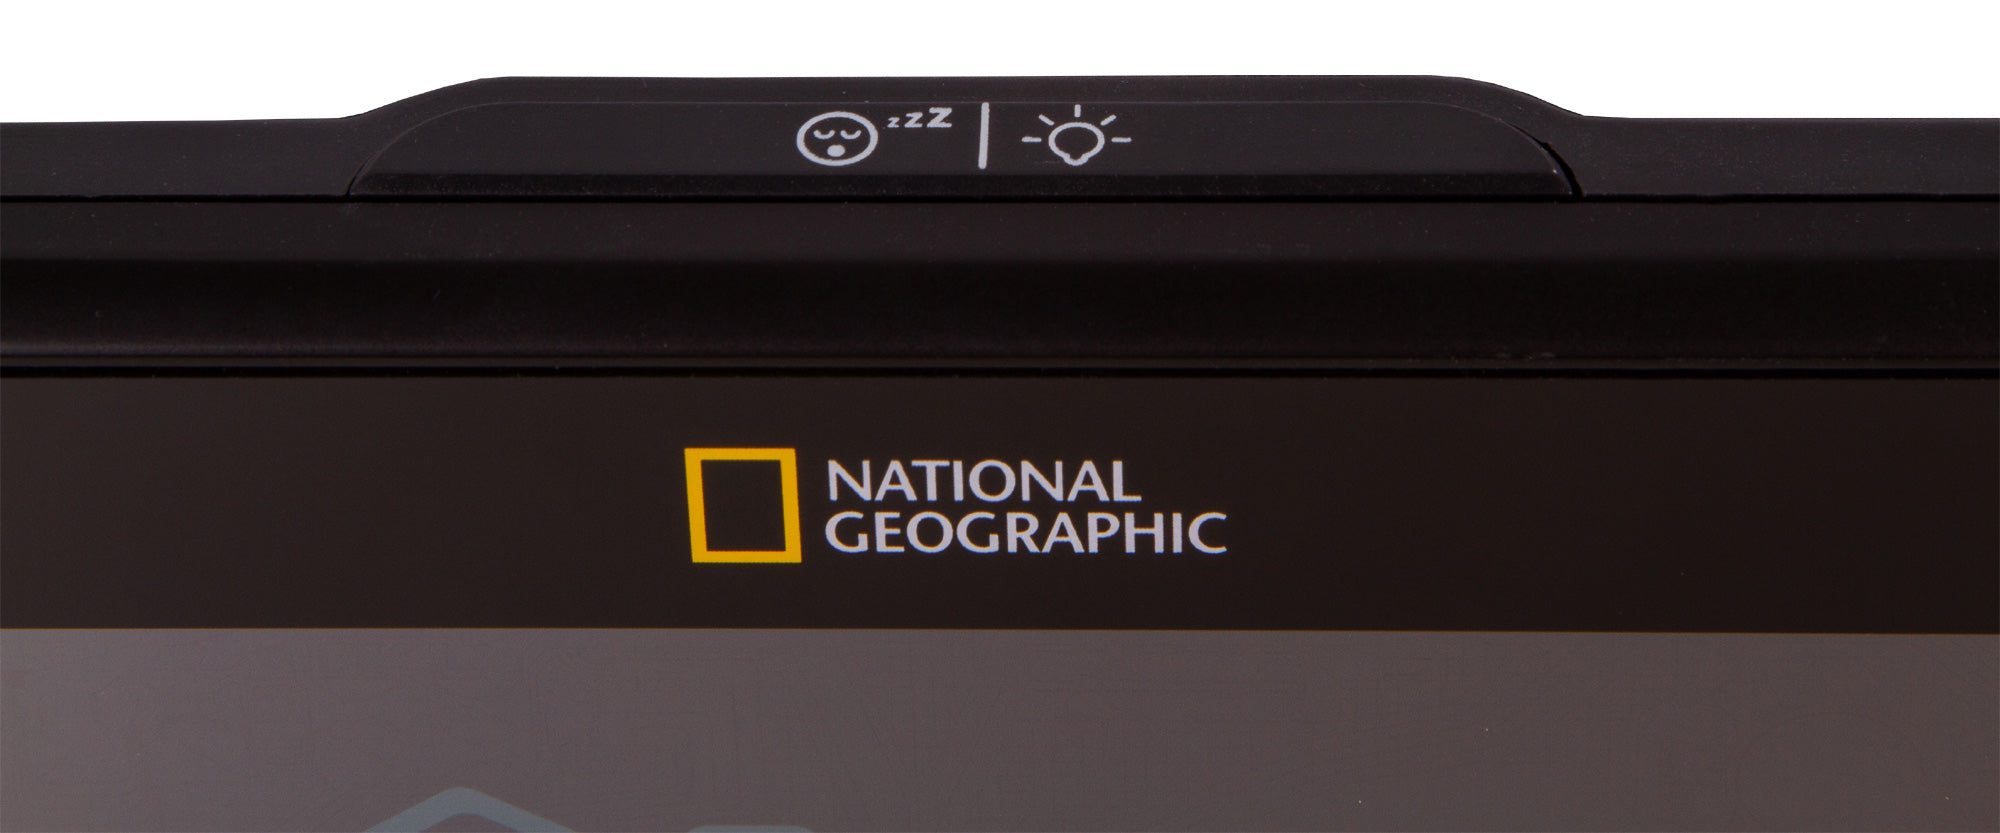 Bresser UK  NATIONAL GEOGRAPHIC VA colour LCD Weather Station